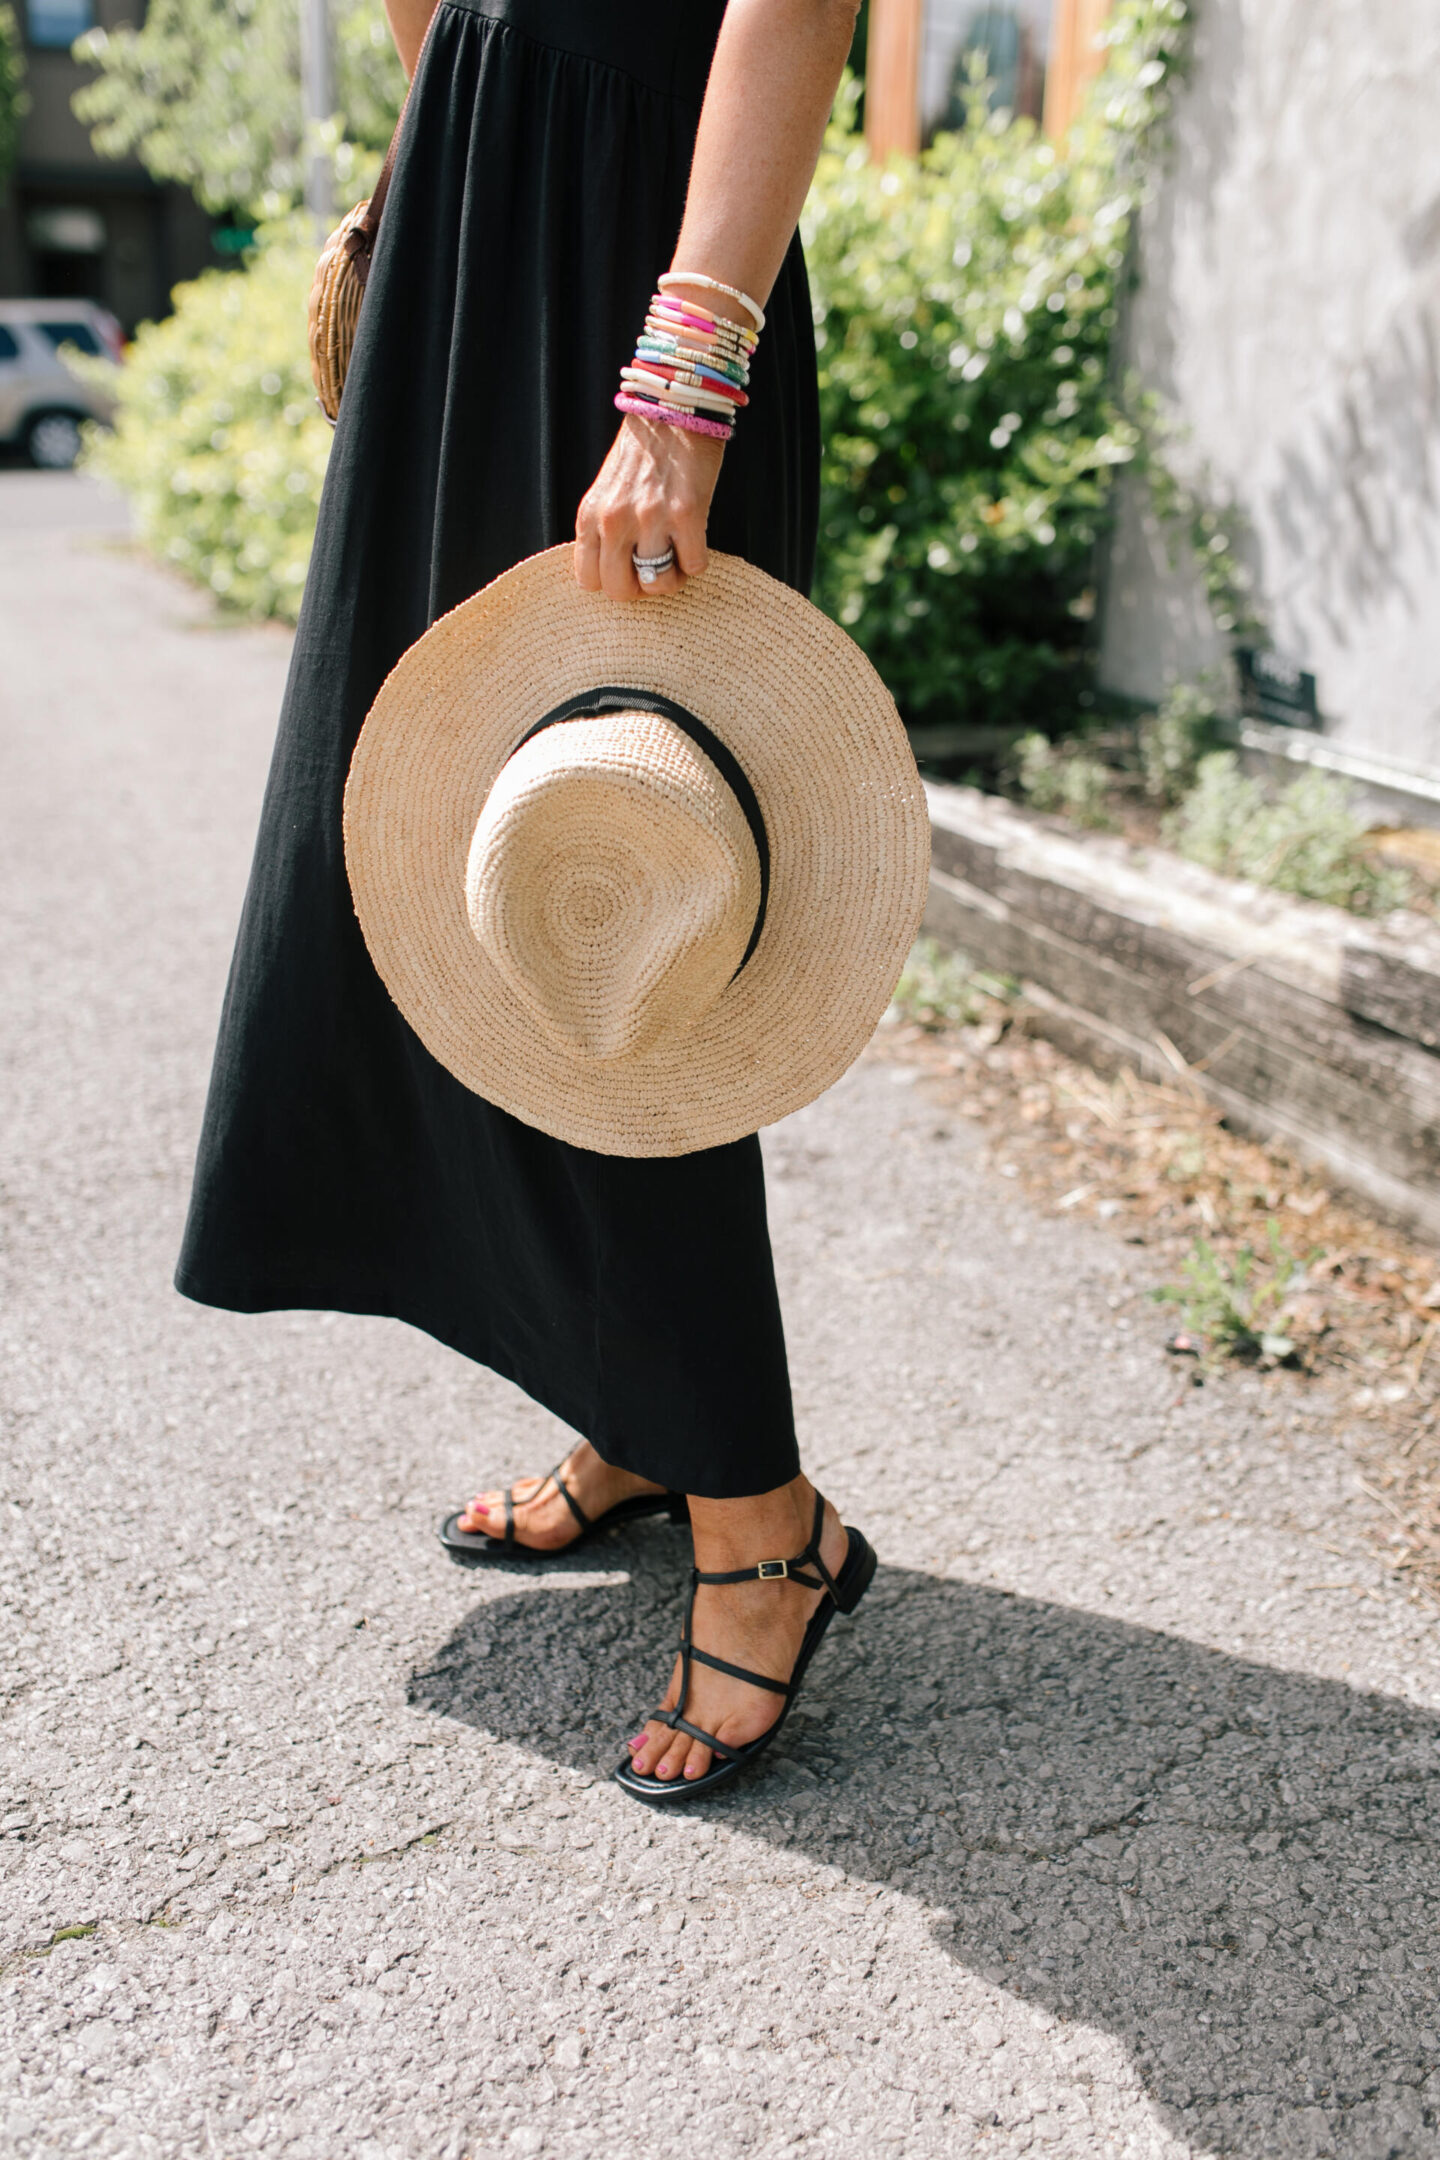 J Crew Clothing by popular Nashville fashion blog, Hello Happiness: image of a woman wearing a black J. Crew sleeveless maxi dress with black strap sandals and a straw sun hat. 